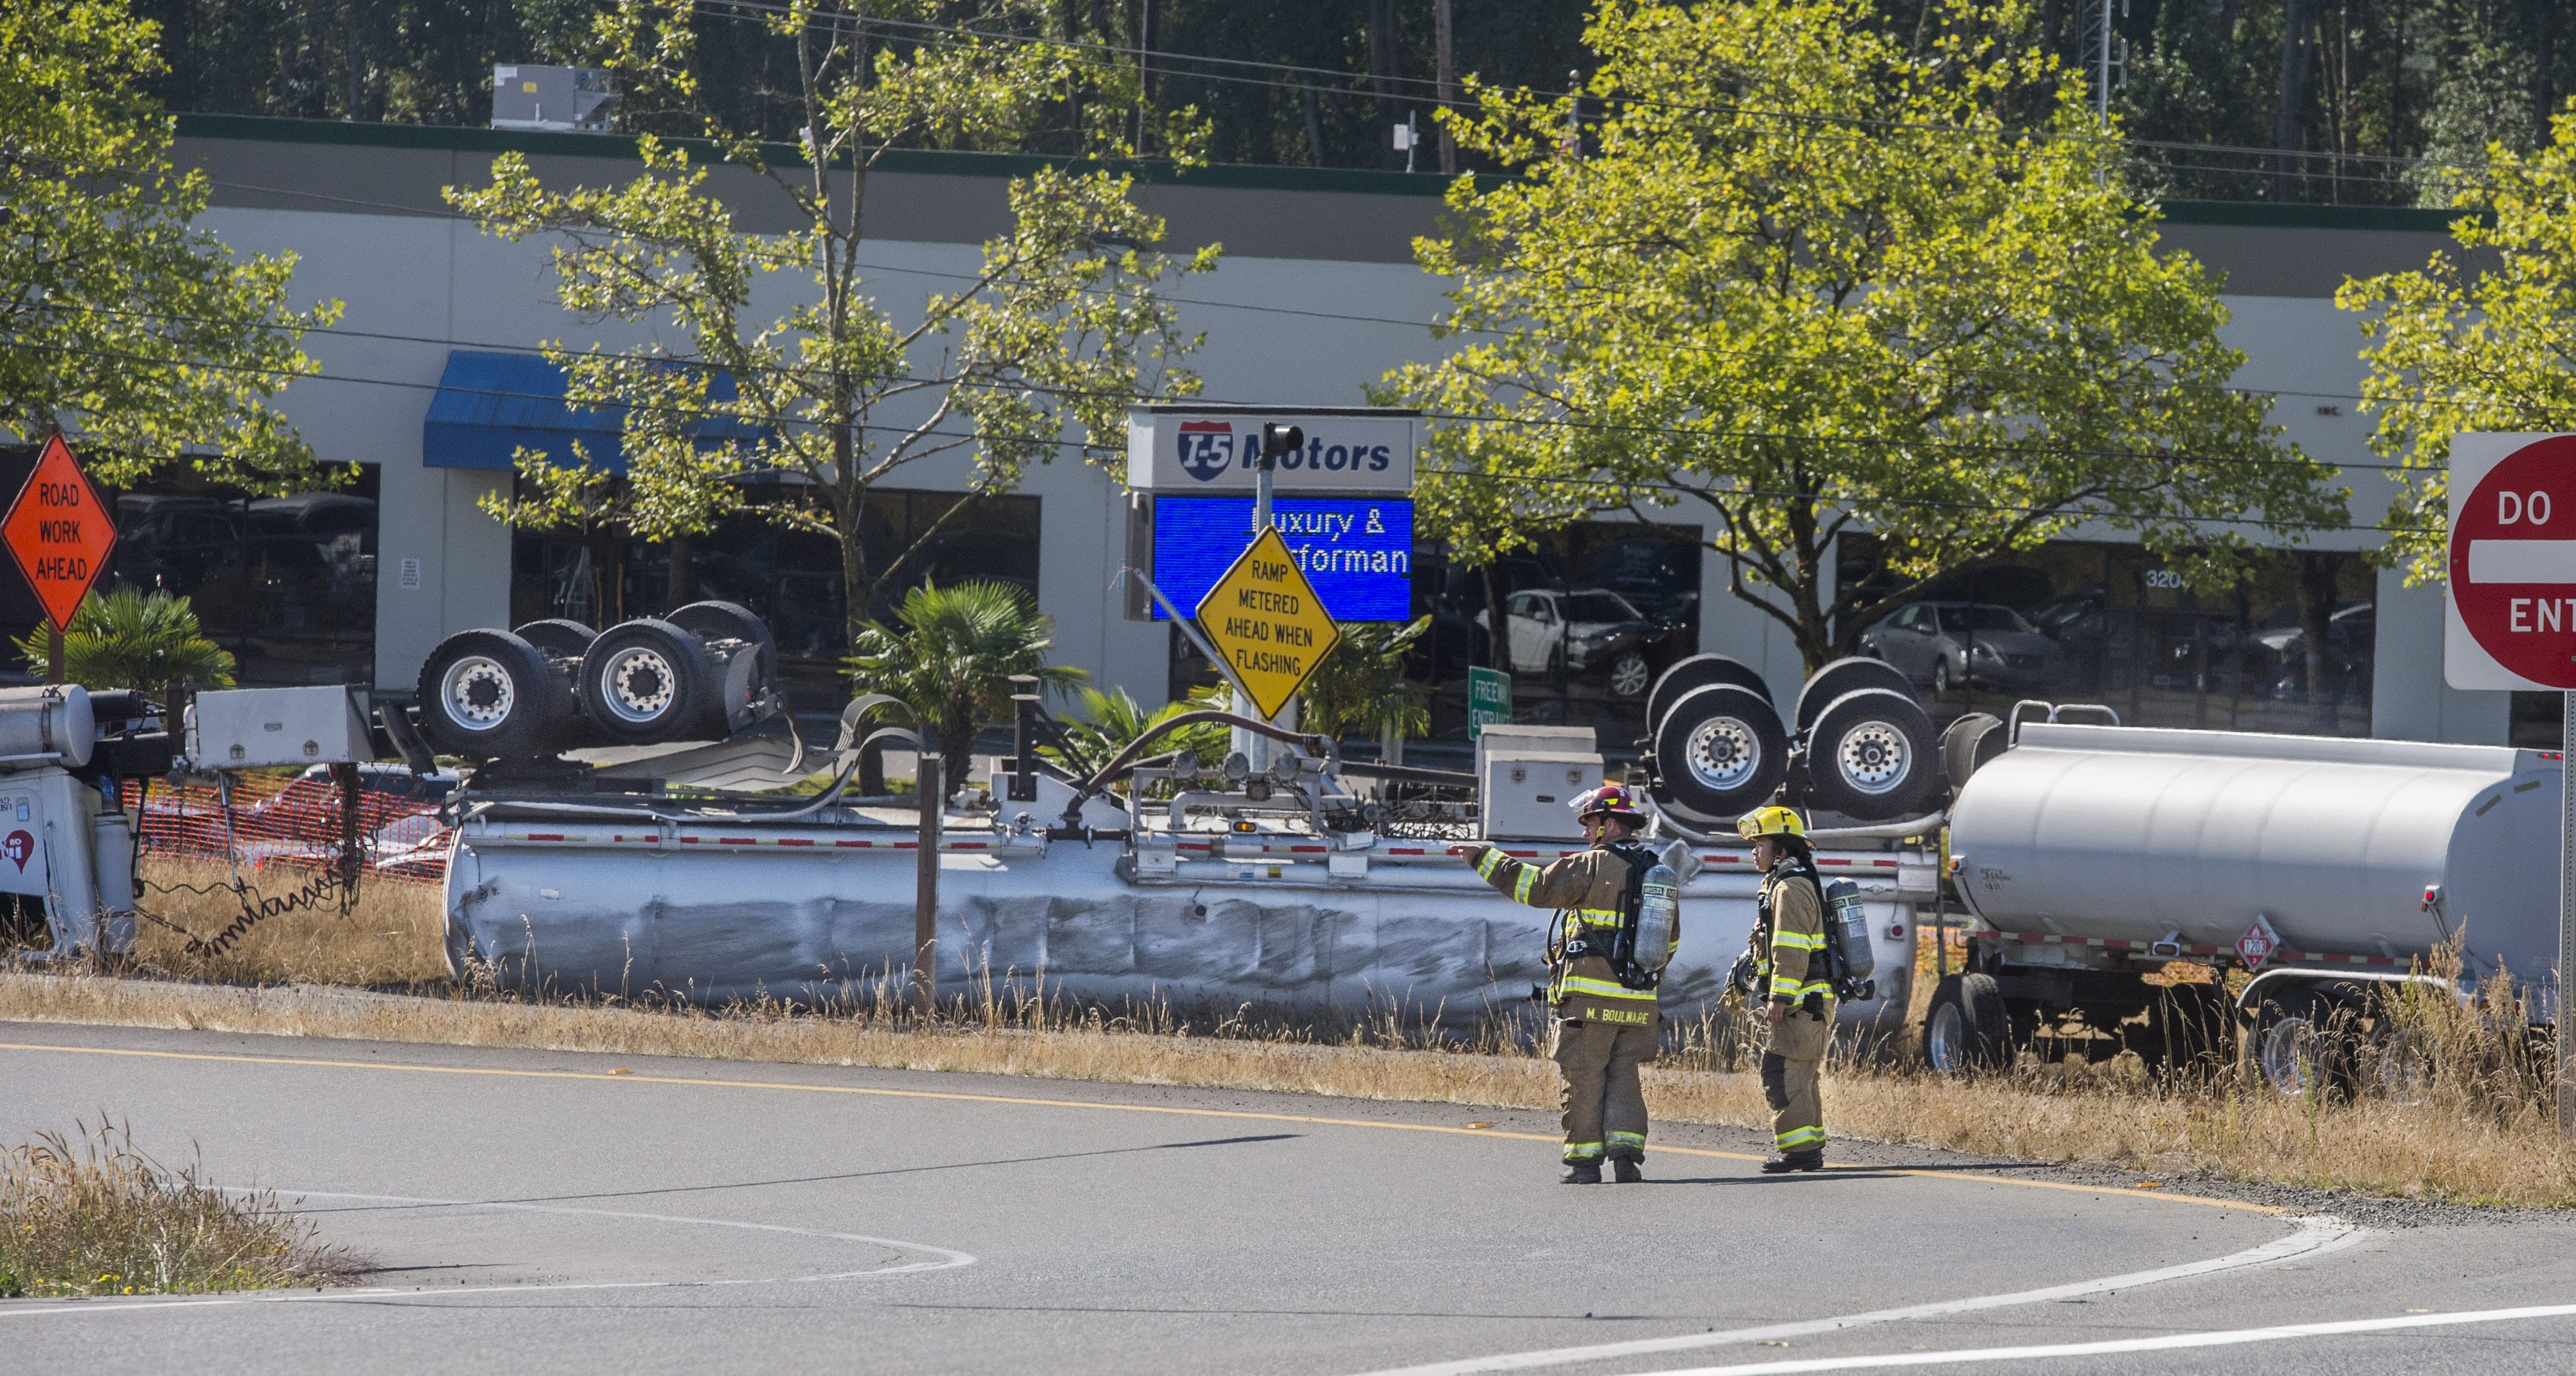 Firefighters stand near an overturned tanker truck at the Port of Tacoma Road entrance to Interstate 5, Thursday, Aug. 18, 2016 in Tacoma, Wash. A section of a major freeway in Washington state has reopened state after a tanker truck rolled over and spilled fuel near the Port of Tacoma.